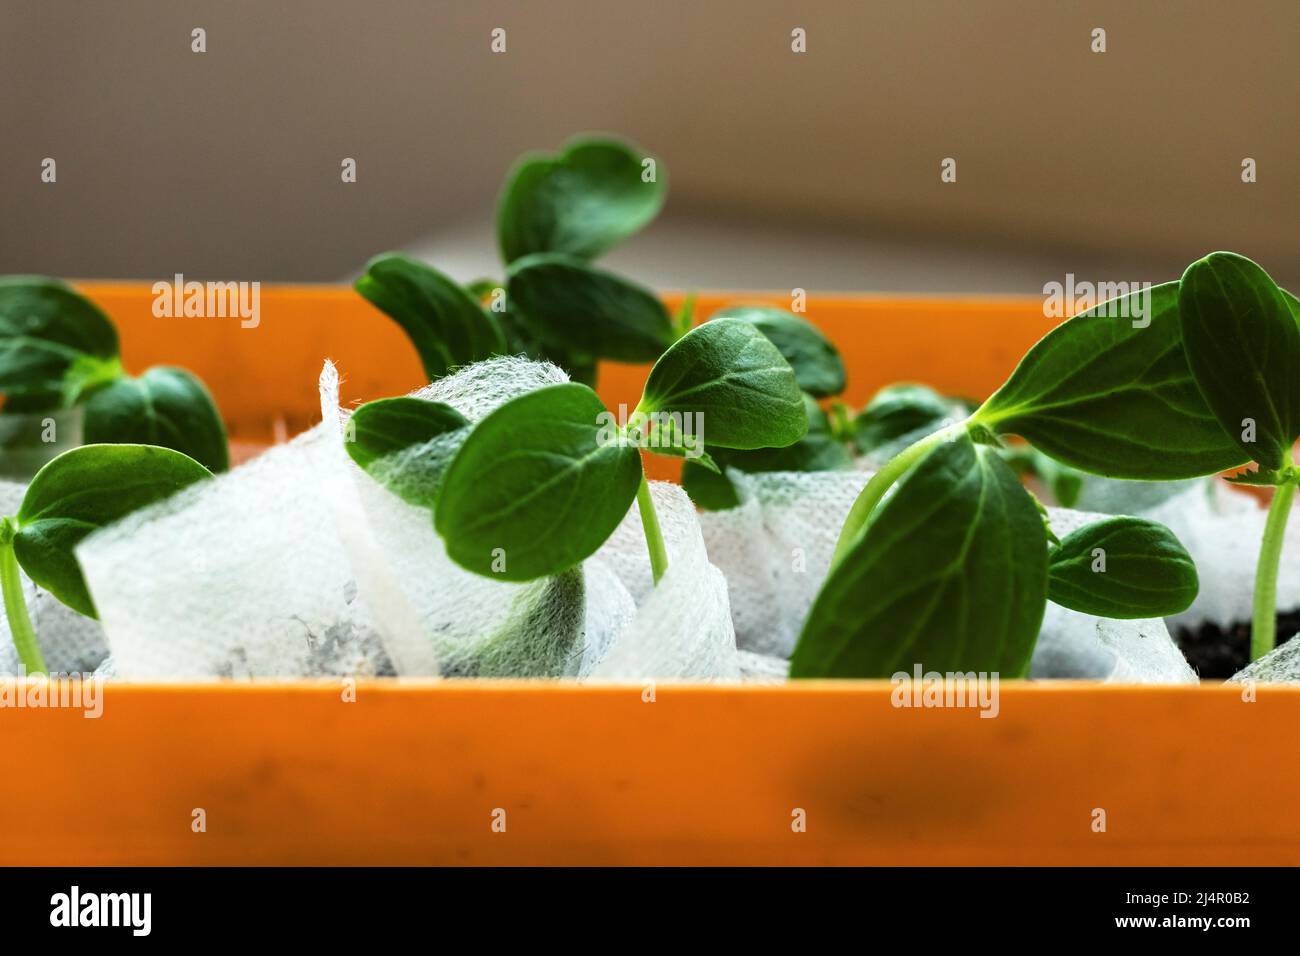 Cucumber seedling young fresh sprouts growing in white bags in orange pot. Greenhouse gardening. Stock Photo